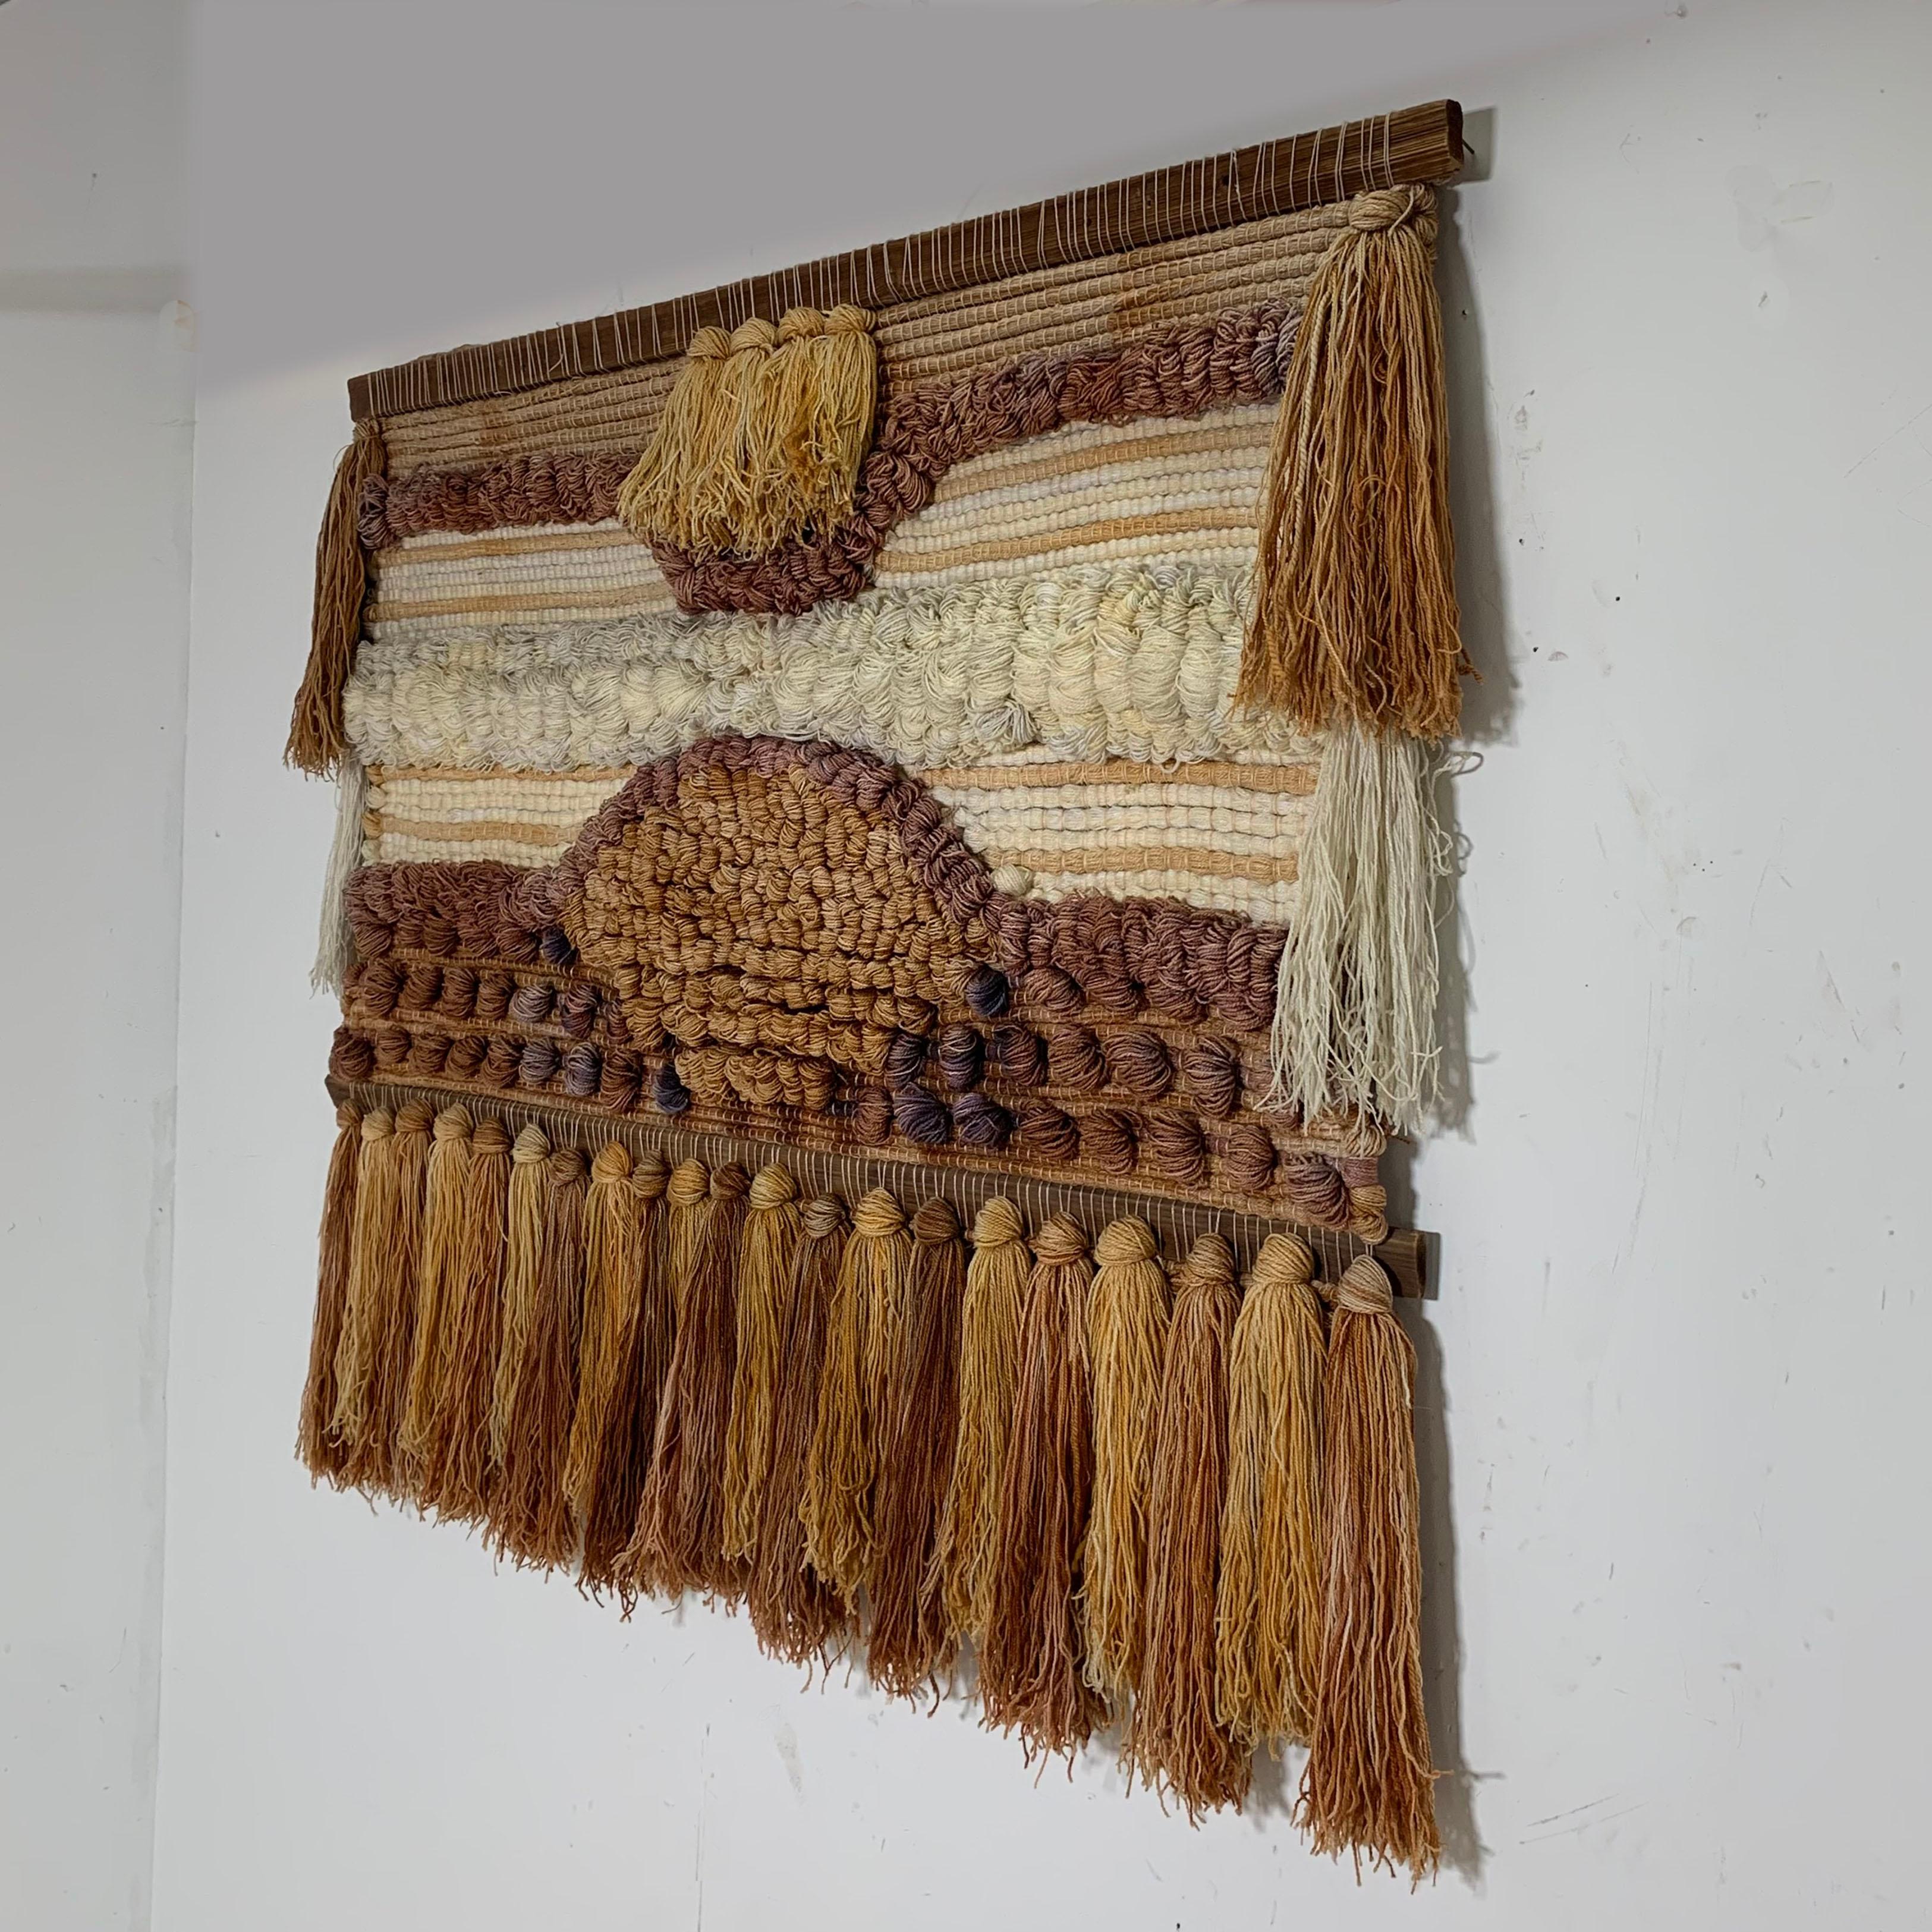 Handmade fiber art wall hanging, circa 1970s. Can be rolled for shipping.